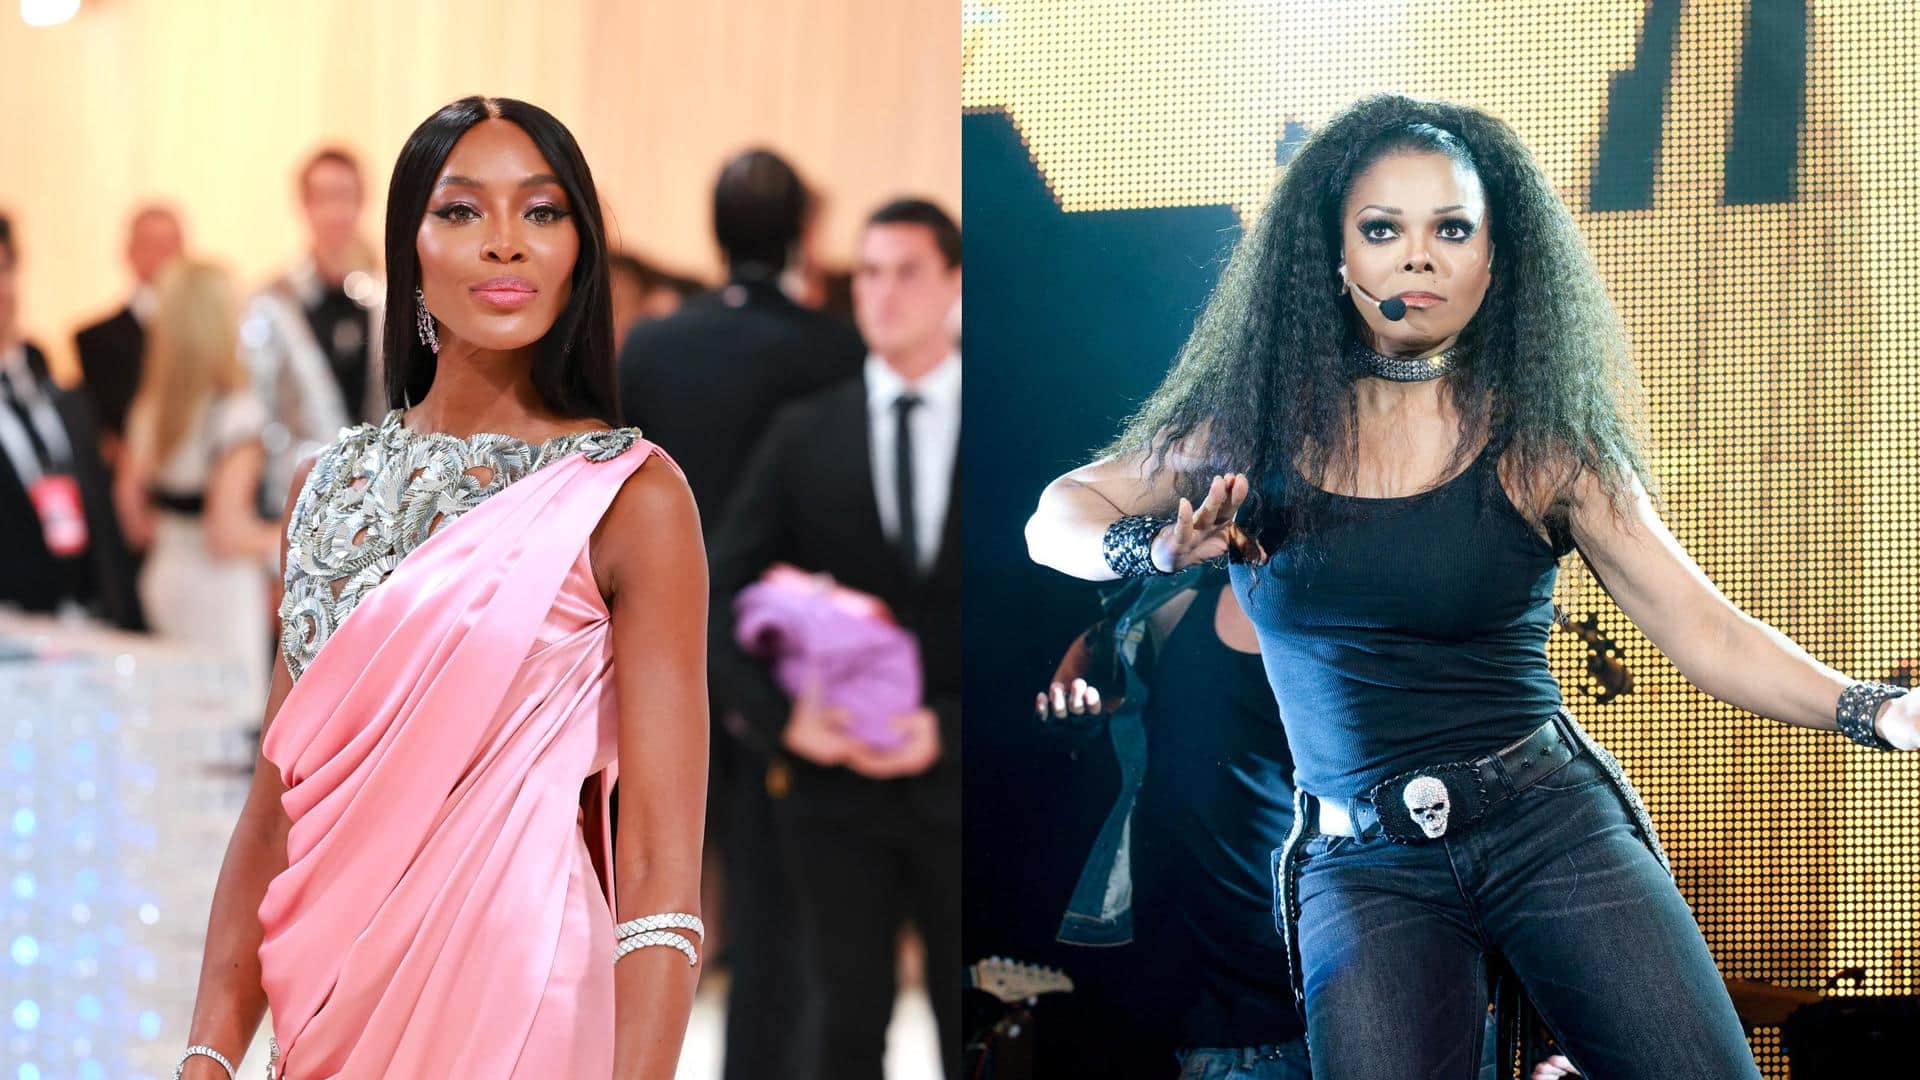 Naomi Campbell (53) gives birth: Celebrities who rocked 'late' pregnancies